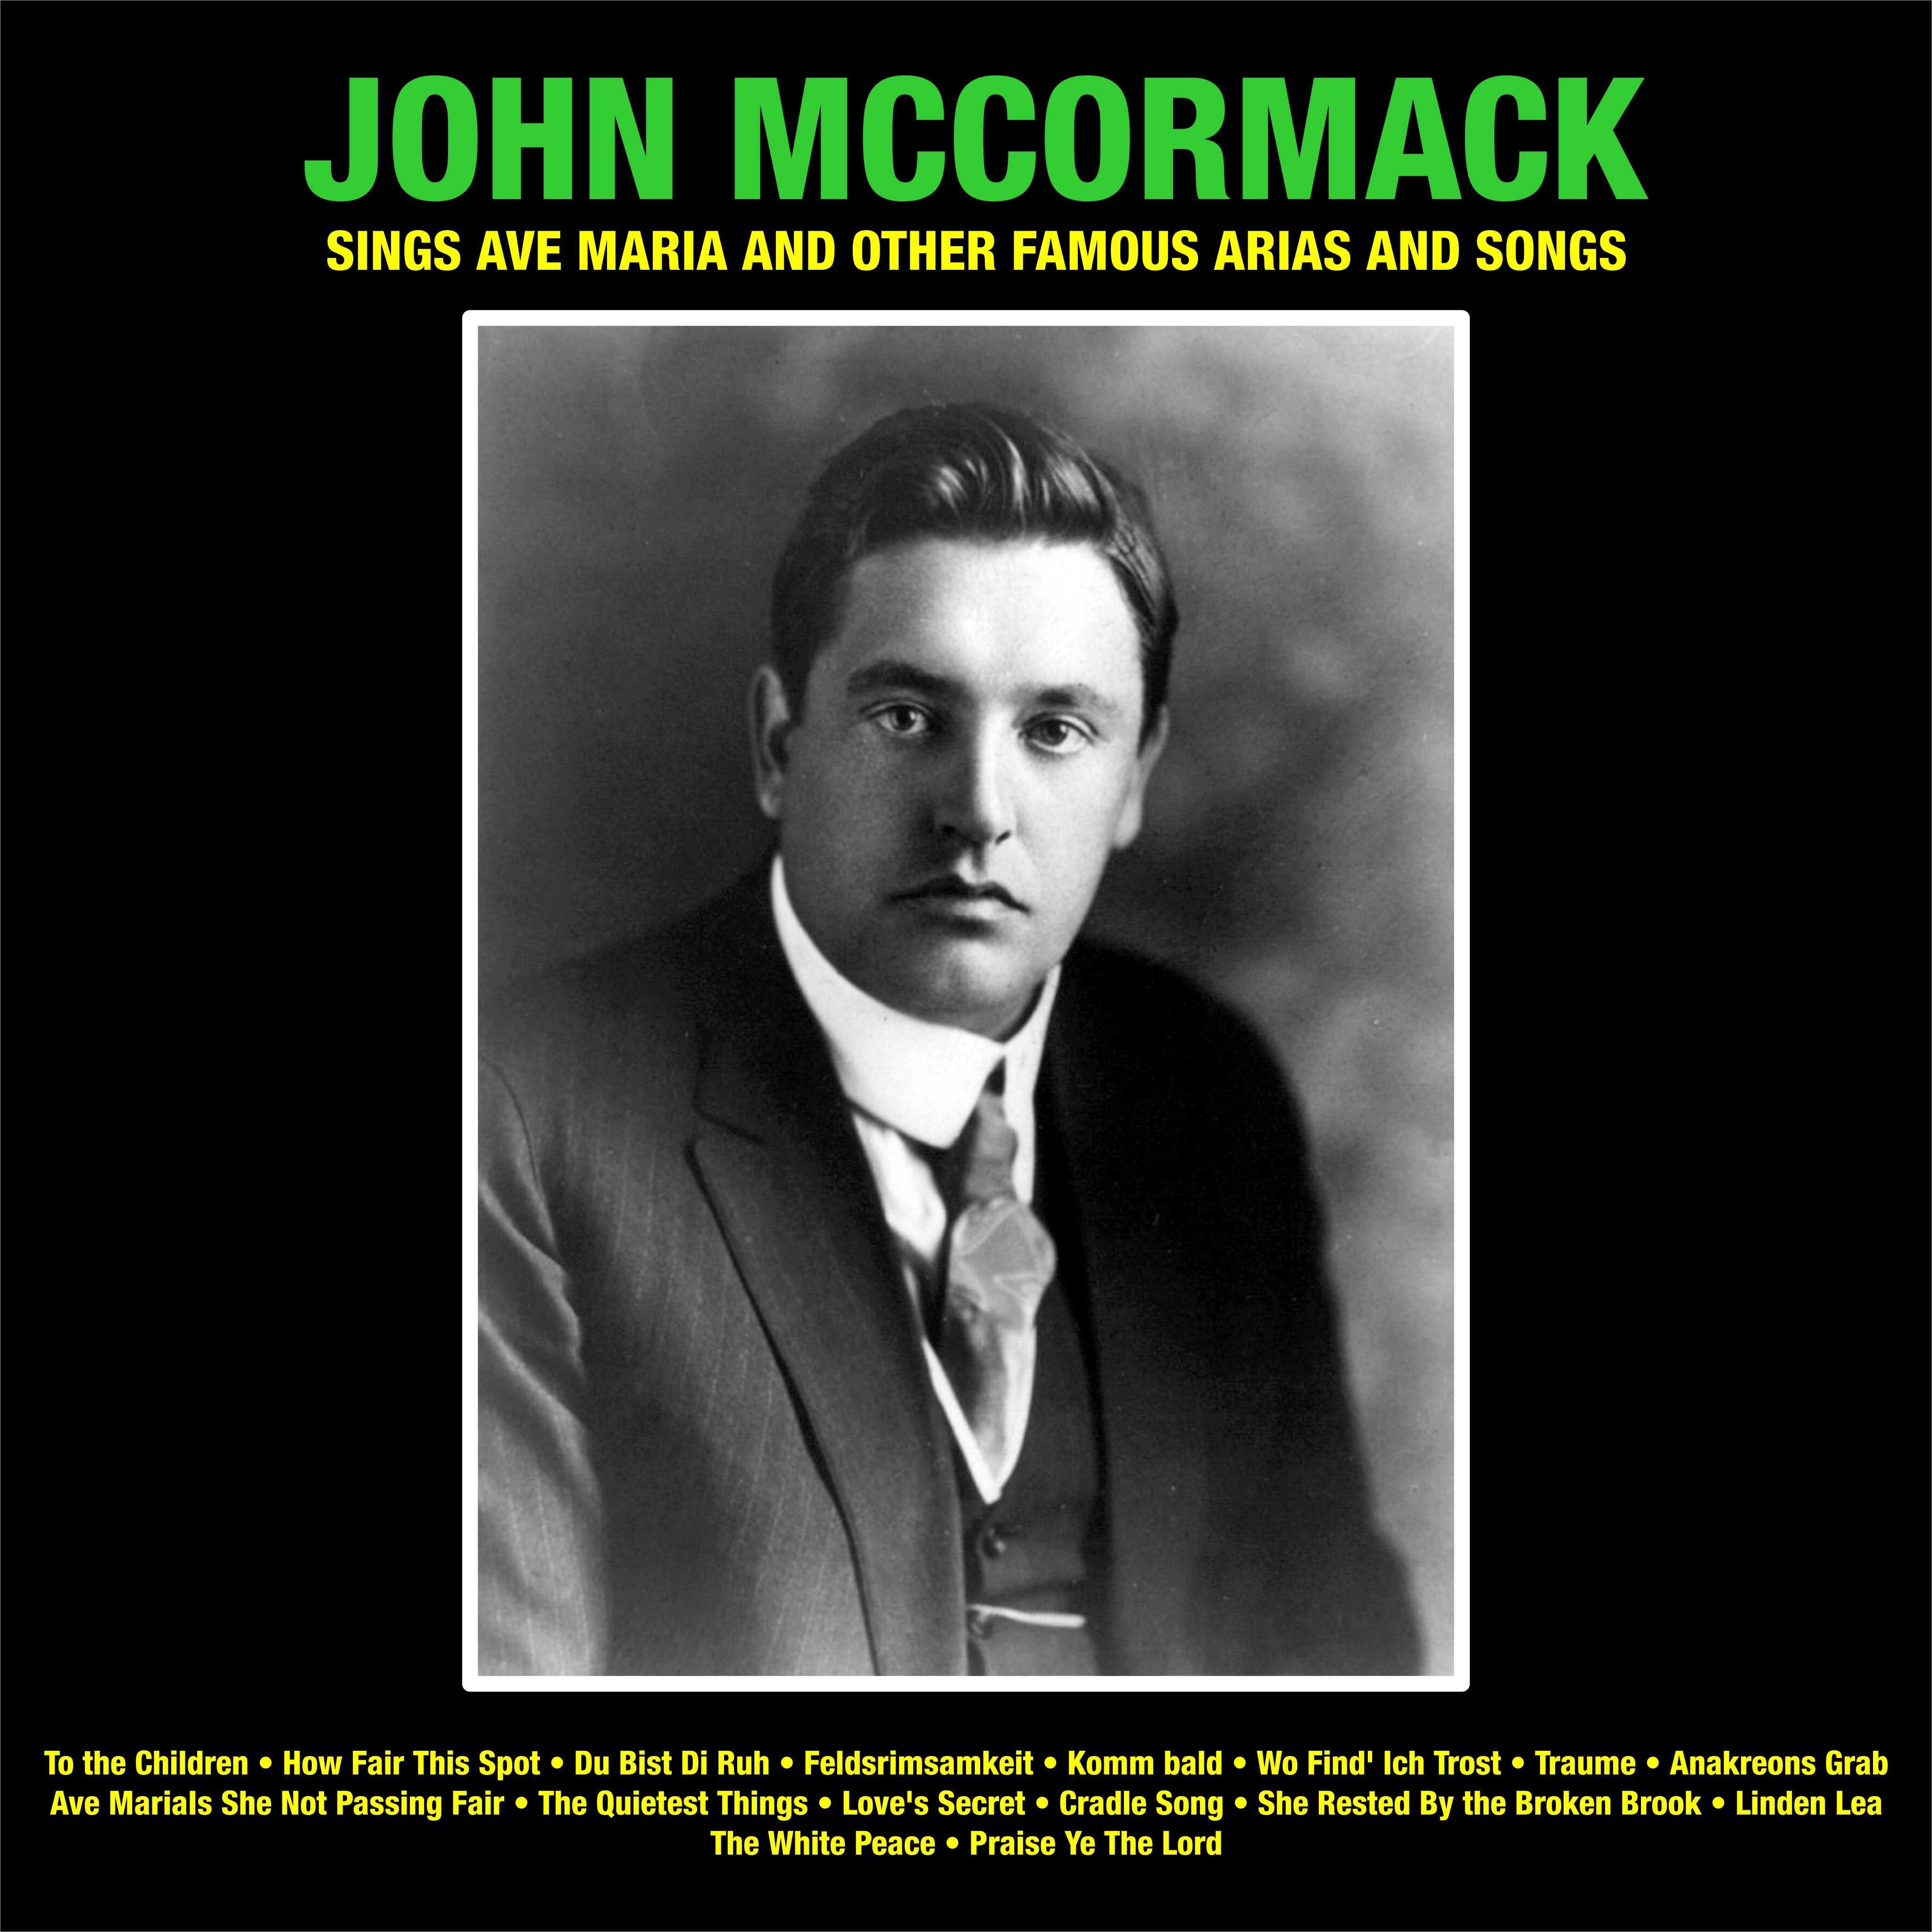 John McCormack Sings Ave Maria  And Other Famous Arias And Songs